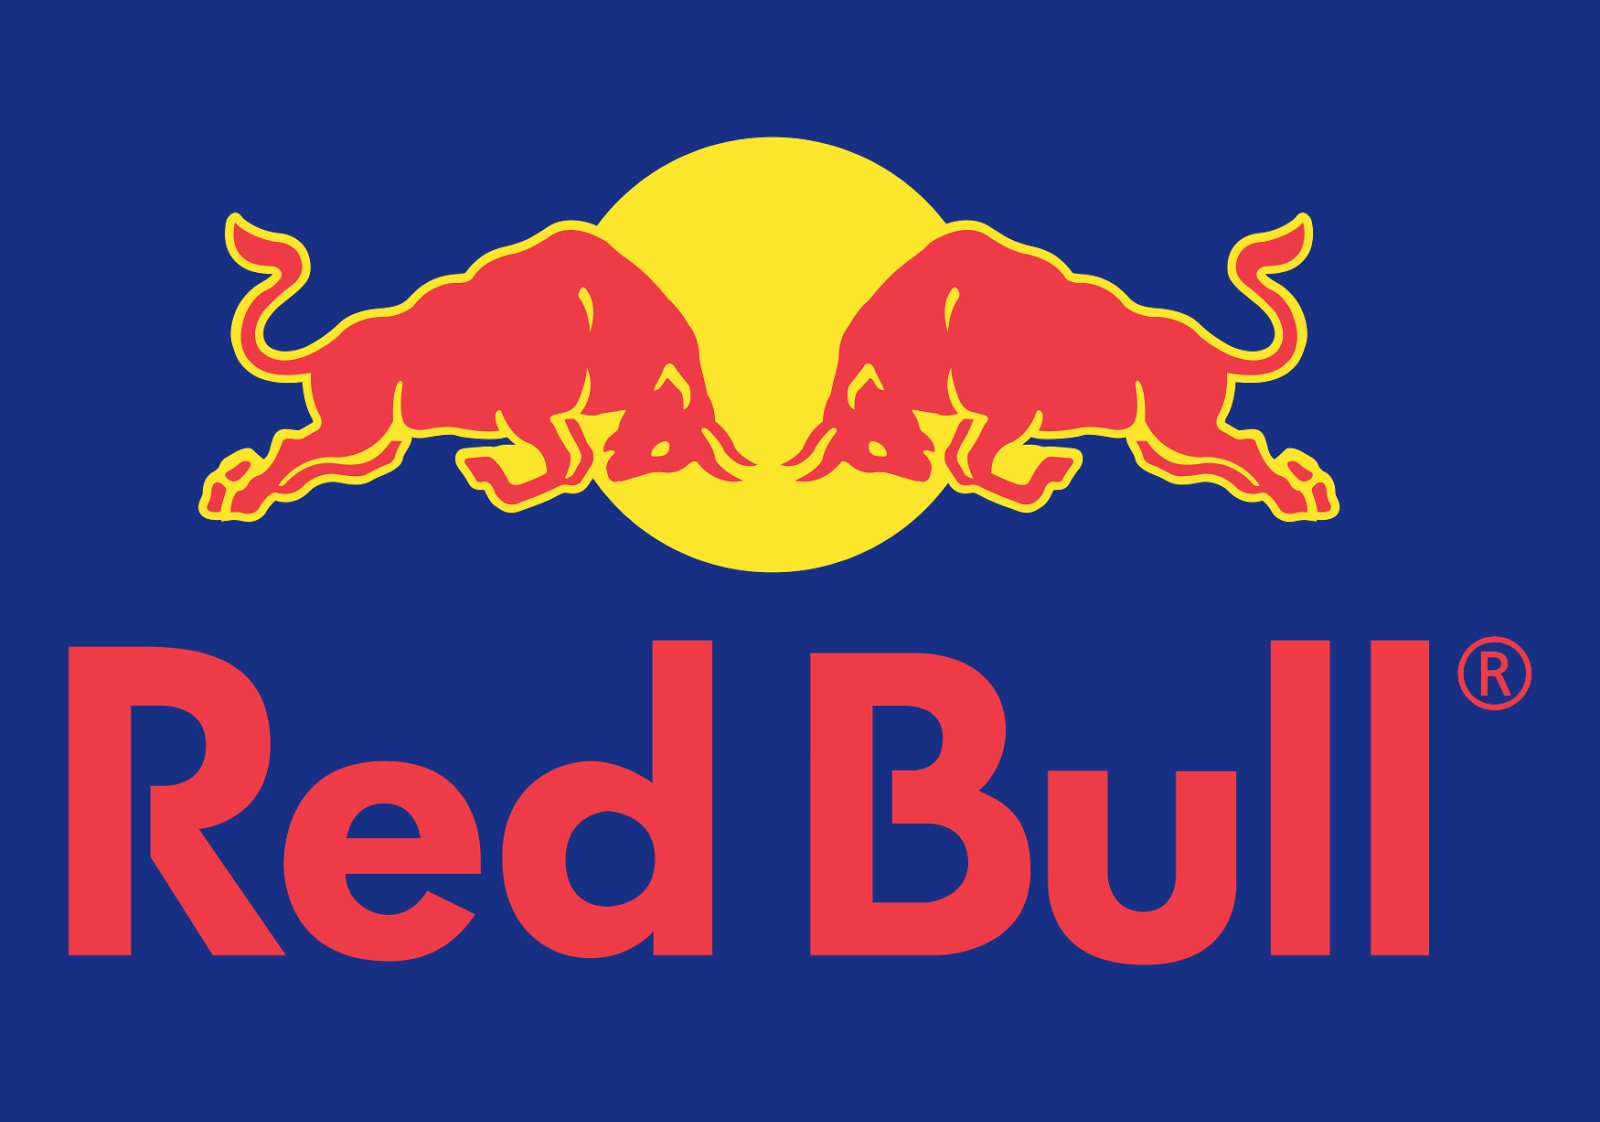 Images Of Red Bull - Printable Template Calendar